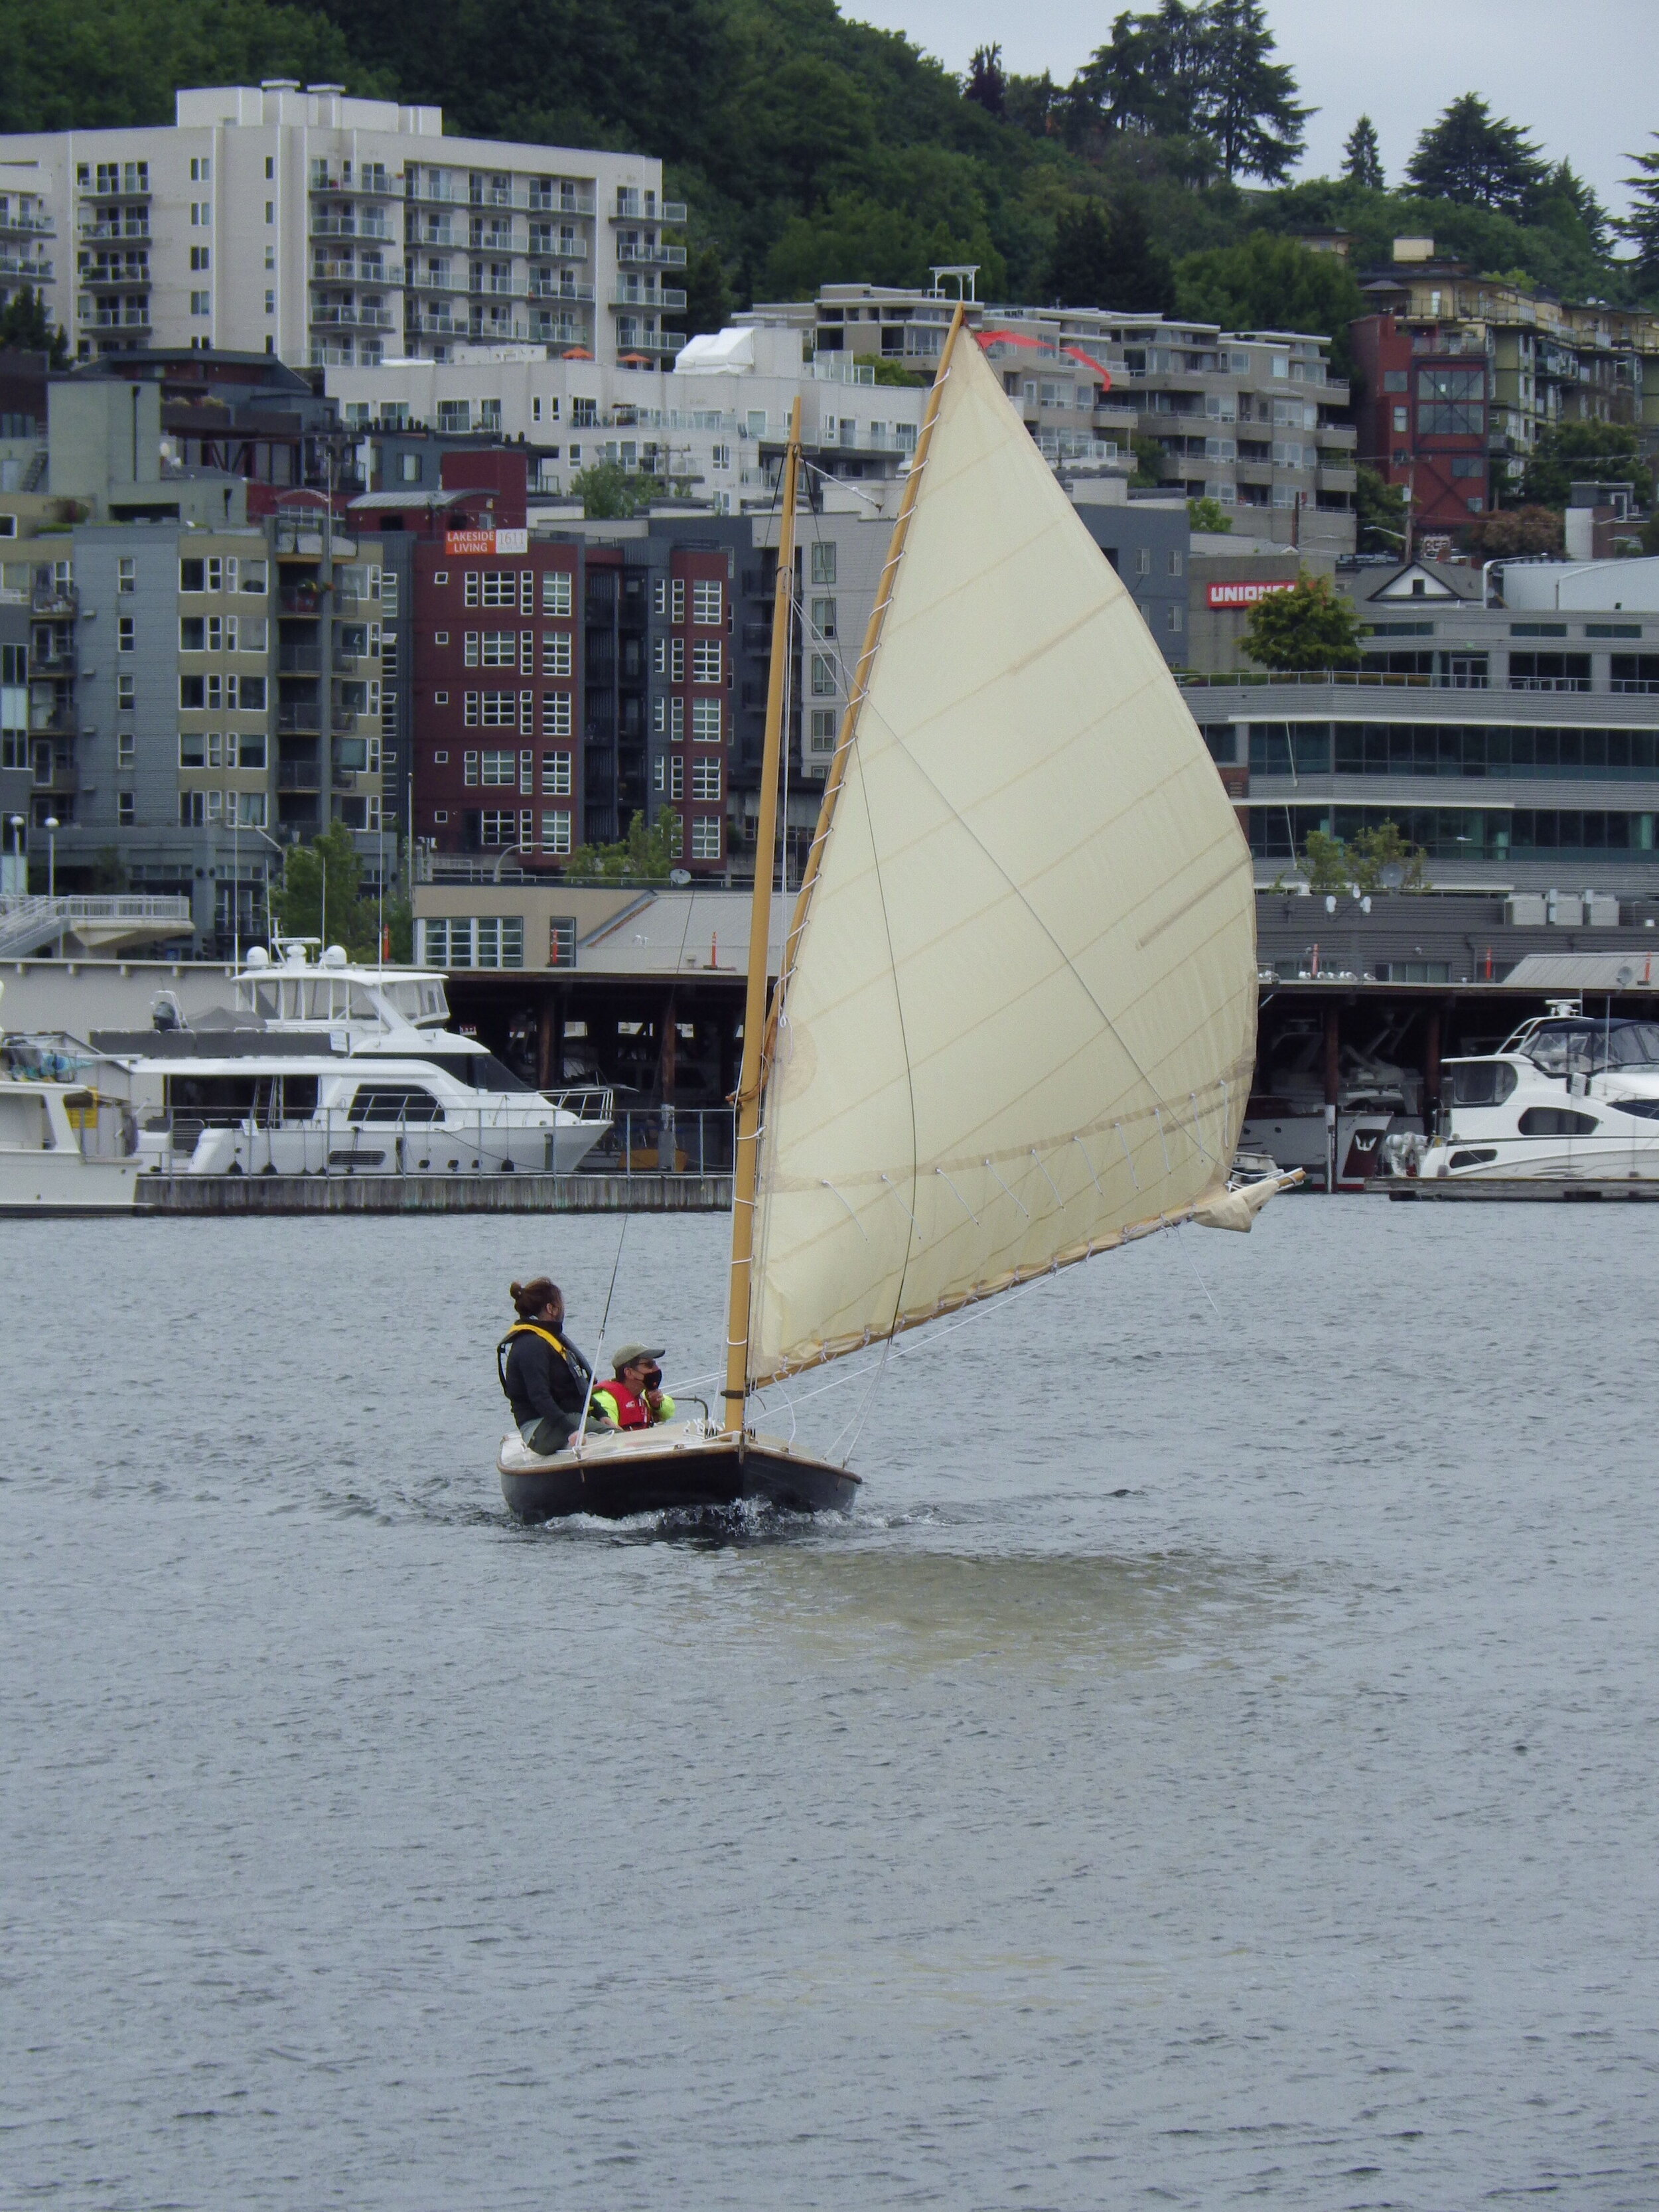 Volunteers test out the sail for the Kitten